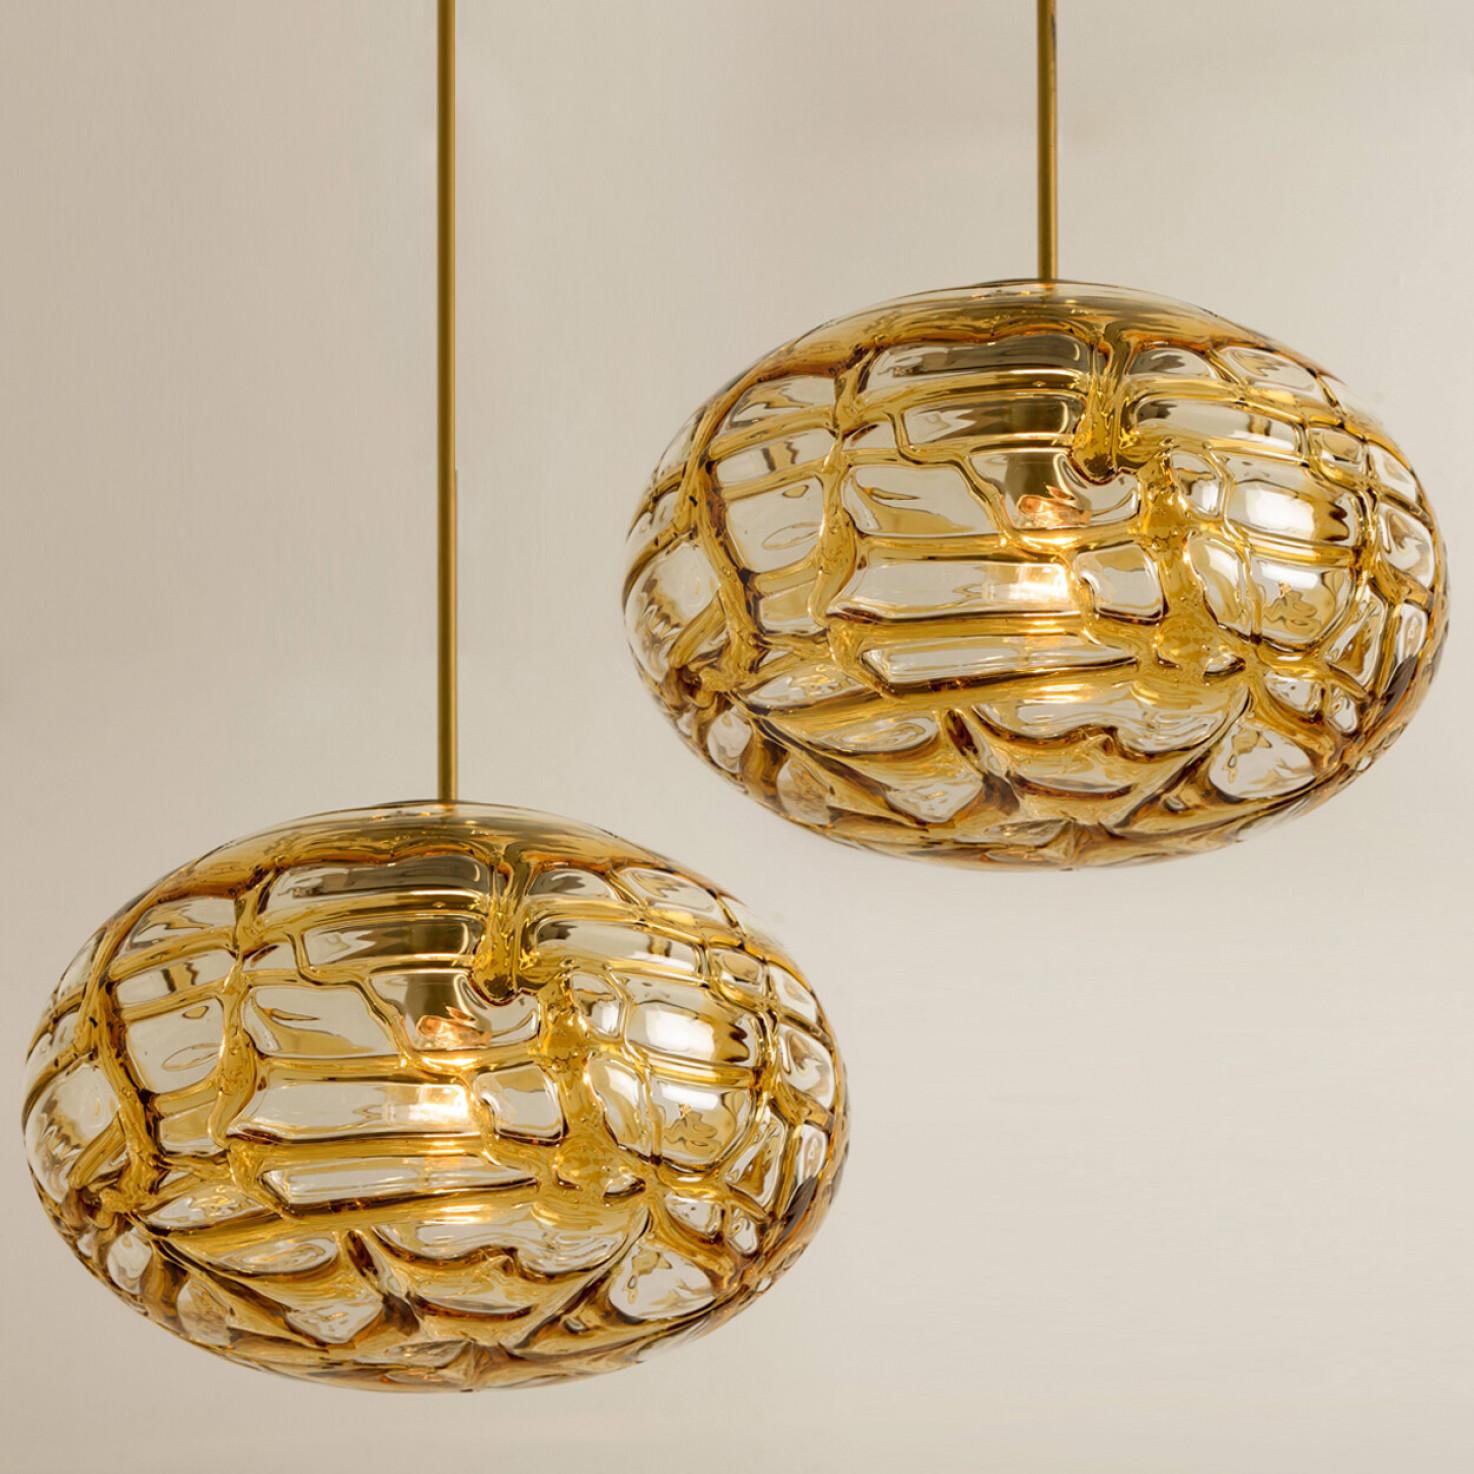 1 of the 3 Murano Yellow Glass Pendant Light, Different Shapes, 1960s For Sale 5